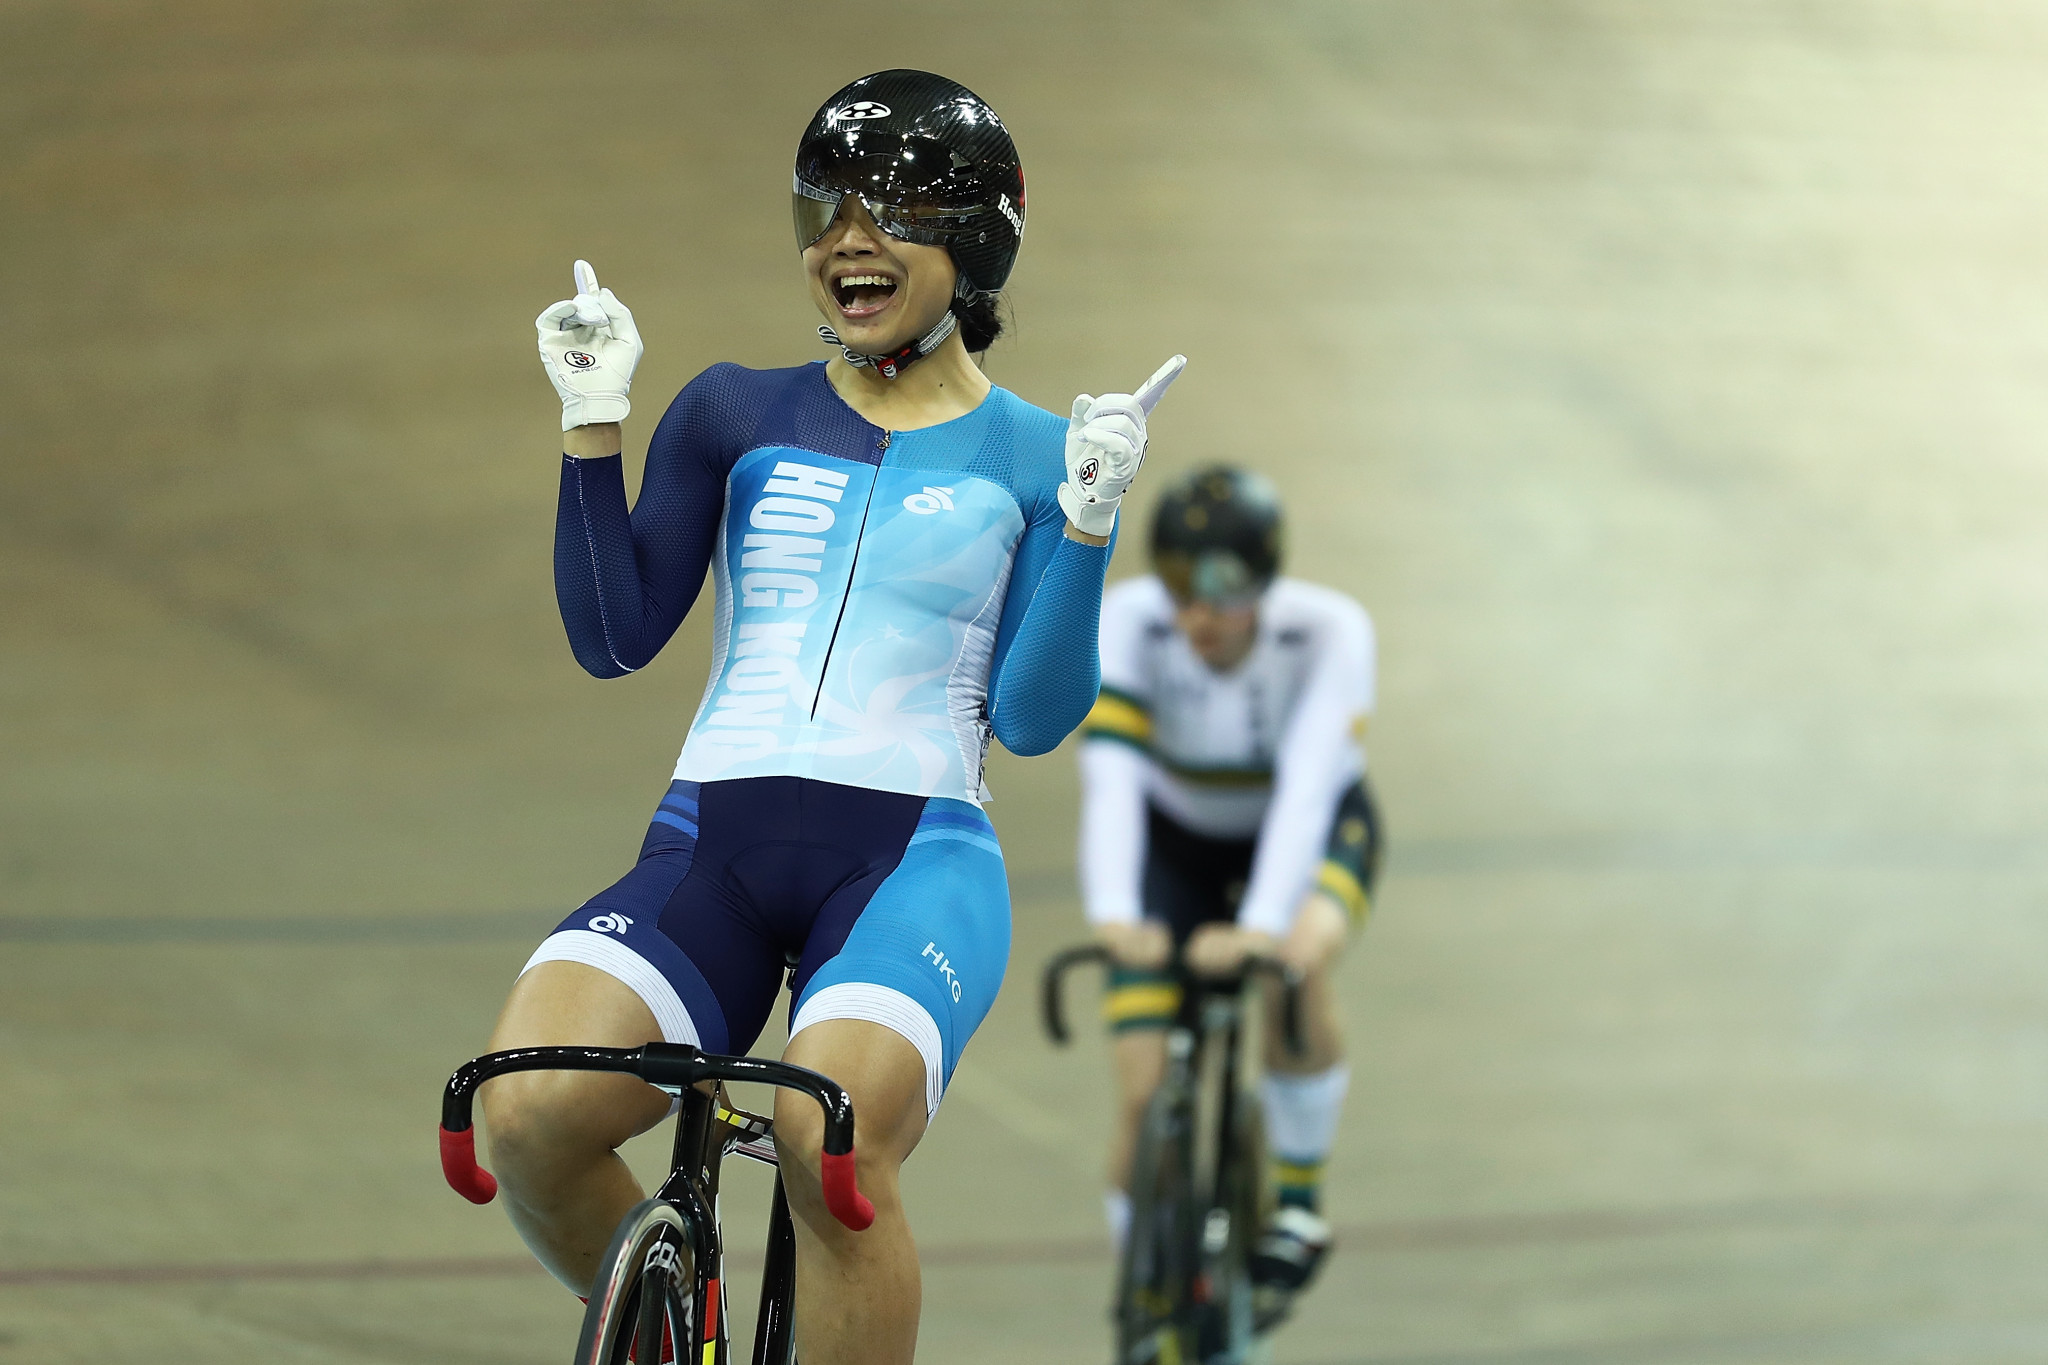 Home favourite earns sprint victory at UCI Track Cycling World Cup in Hong Kong